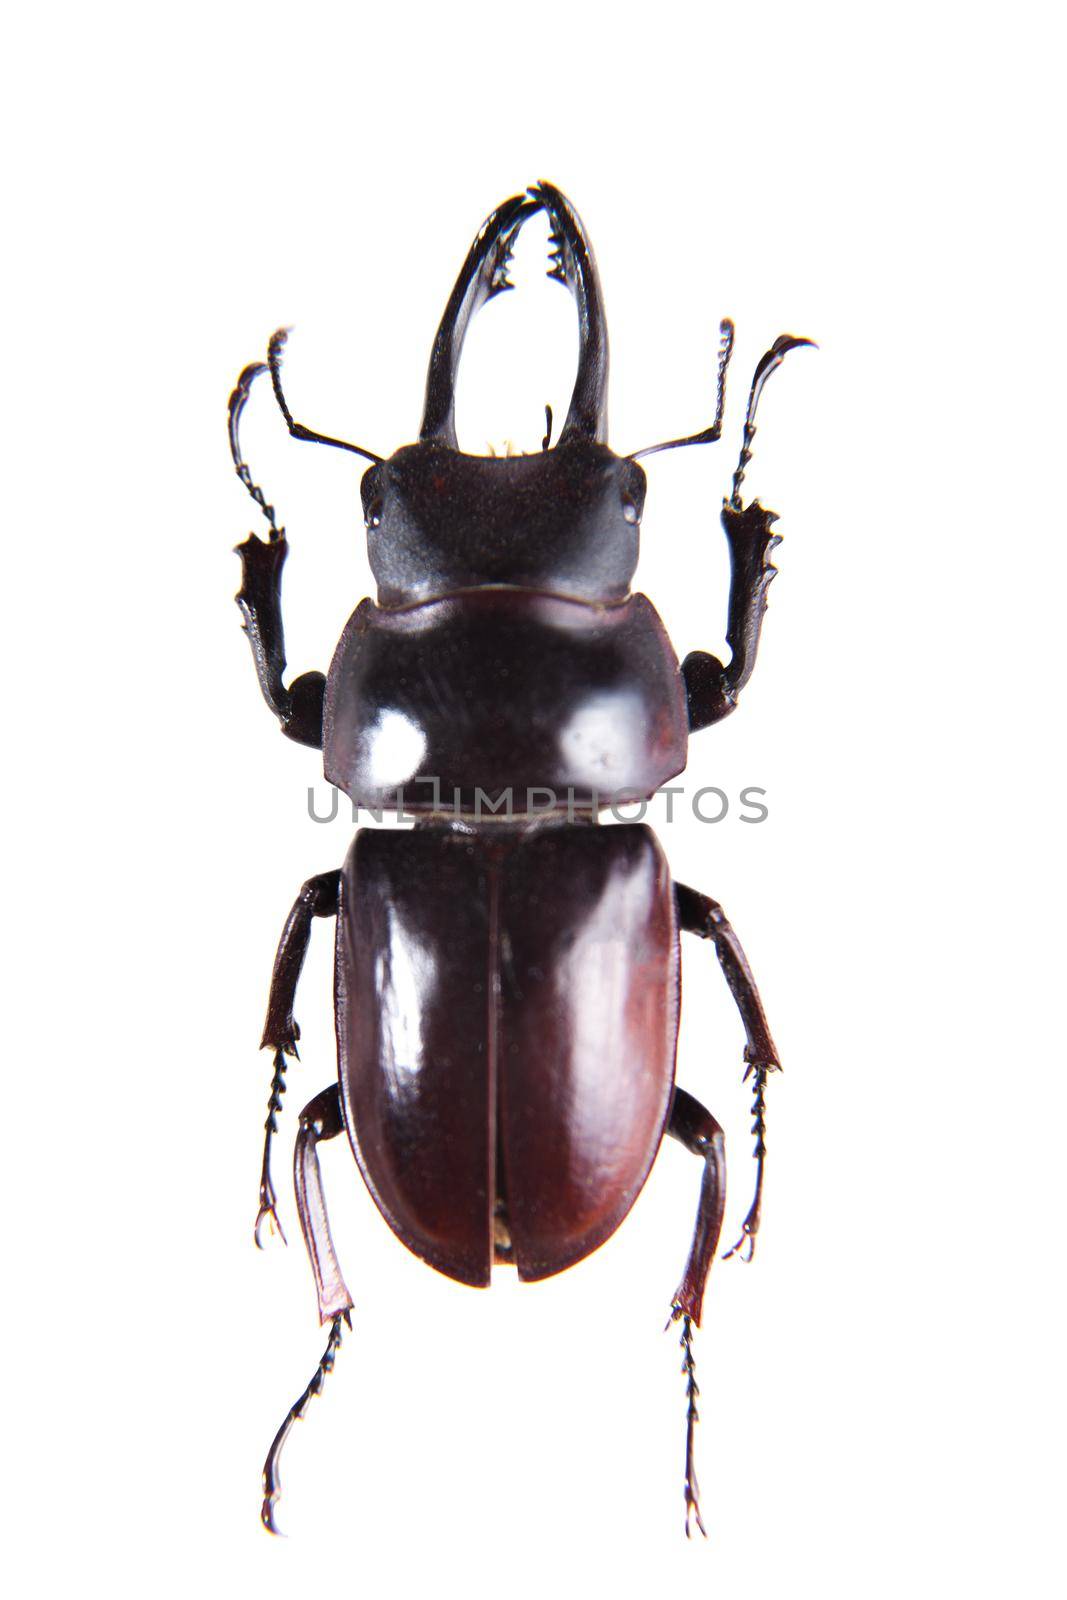 Stag beetle on the white background by RosaJay